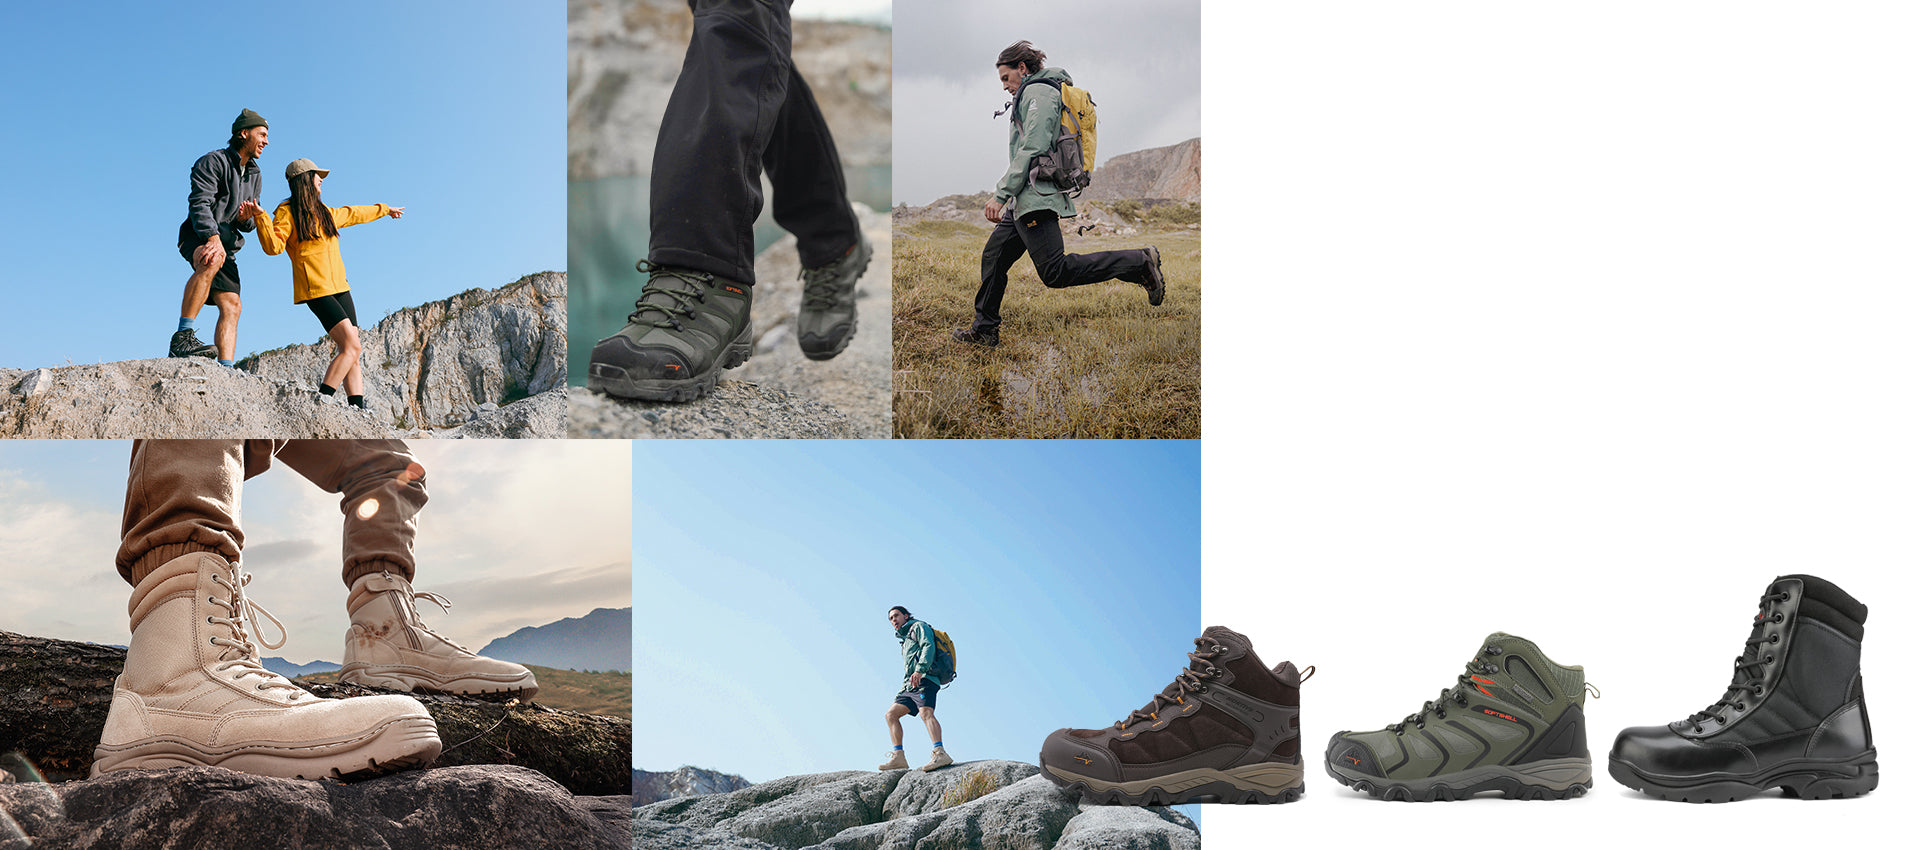 Nortiv8 Shoes | Hiking, Working and Outdoor Shoes & Boots